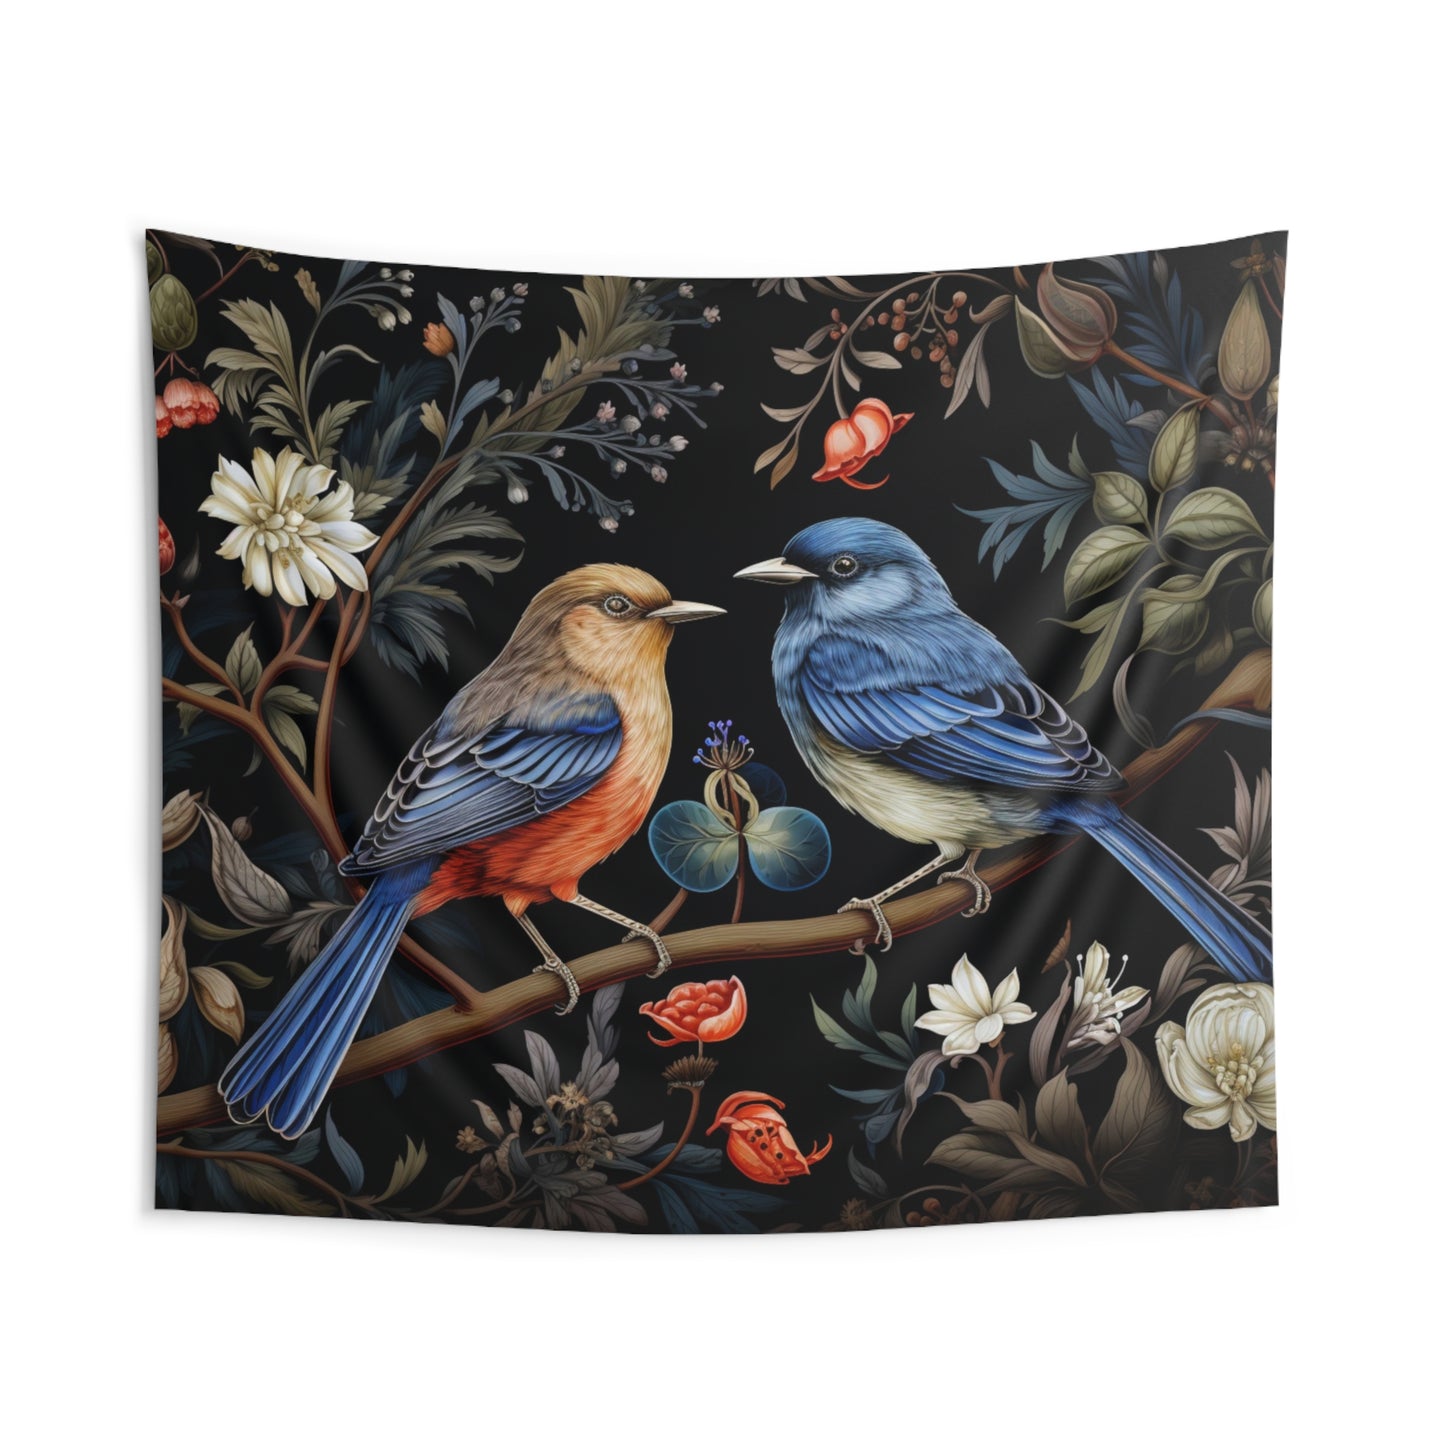 Birds Tapestry, Vintage Floral Nature Wall Art Hanging Cool Unique Landscape Aesthetic Large Small Decor Bedroom College Dorm Room Starcove Fashion